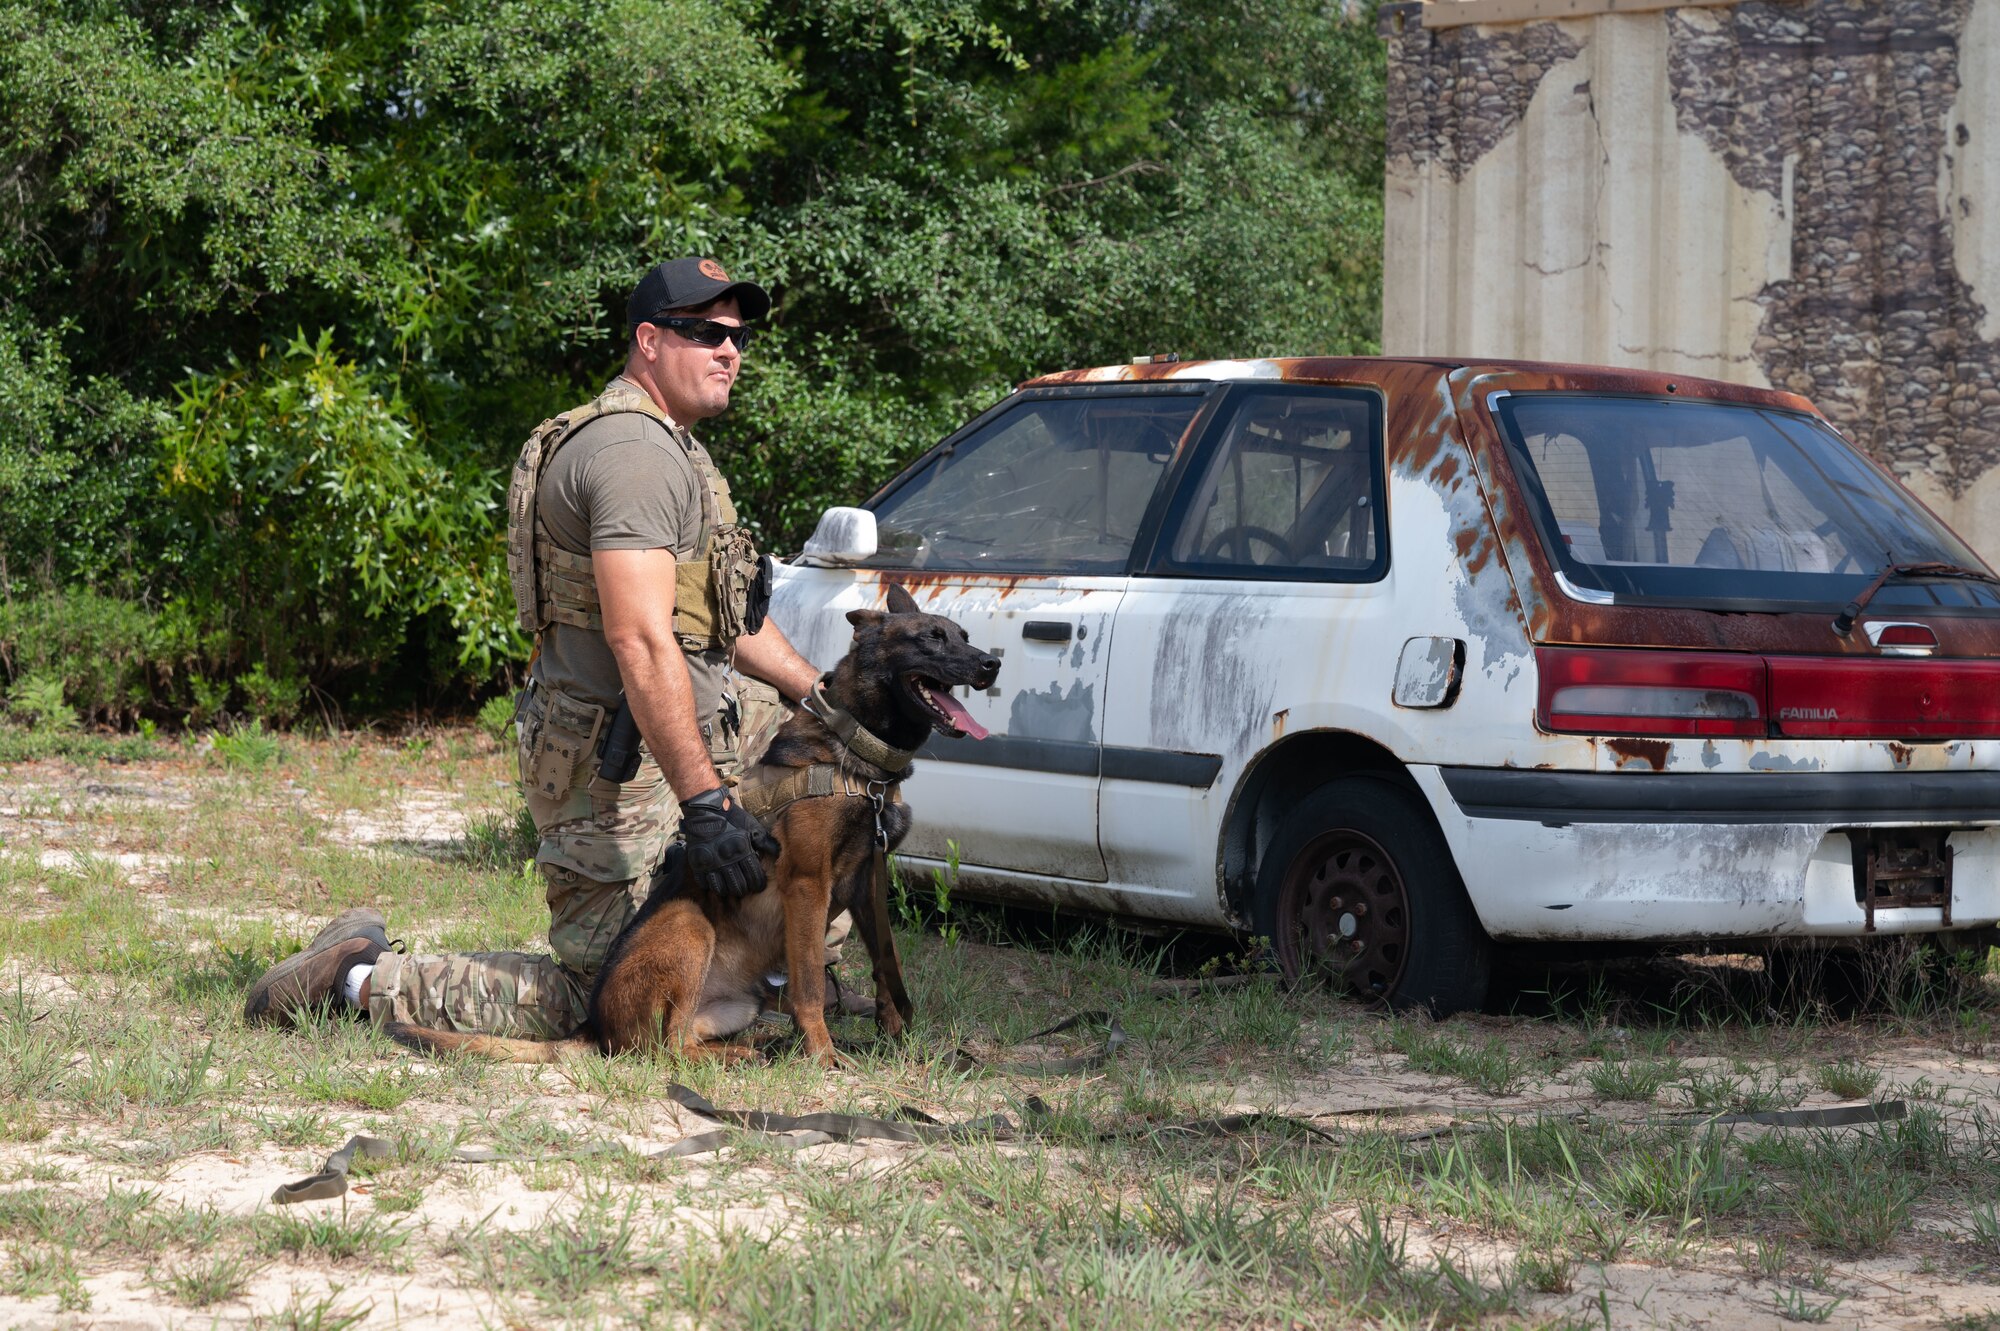 U.S. Army Military Working Dog Handler with the 7th special forces group, competes in a K9 competition during National Police Week on May 18, 2022, at Eglin Air Force Base.